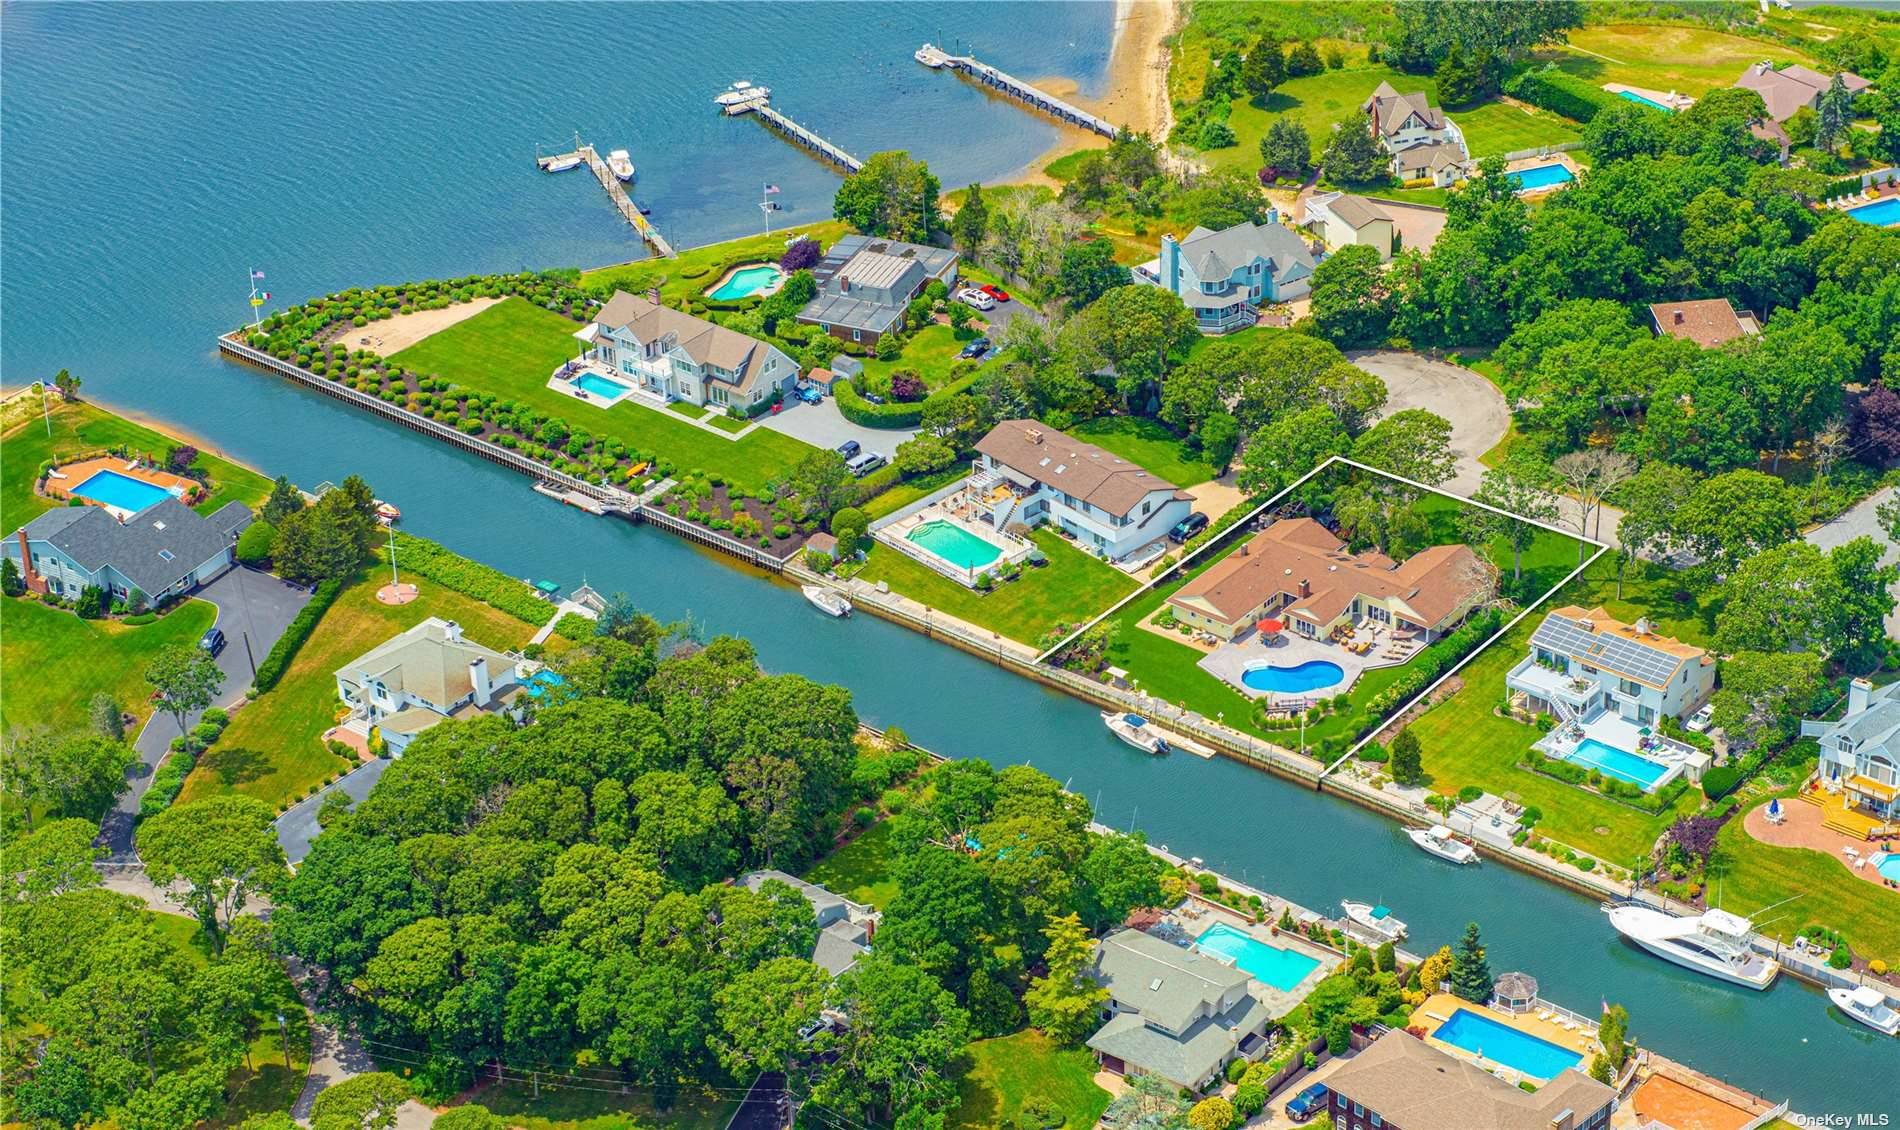 Located within the exclusive Old Harbor Colony Community in Hampton Bays, this stunning waterfront property offers a picturesque escape with luxurious amenities.